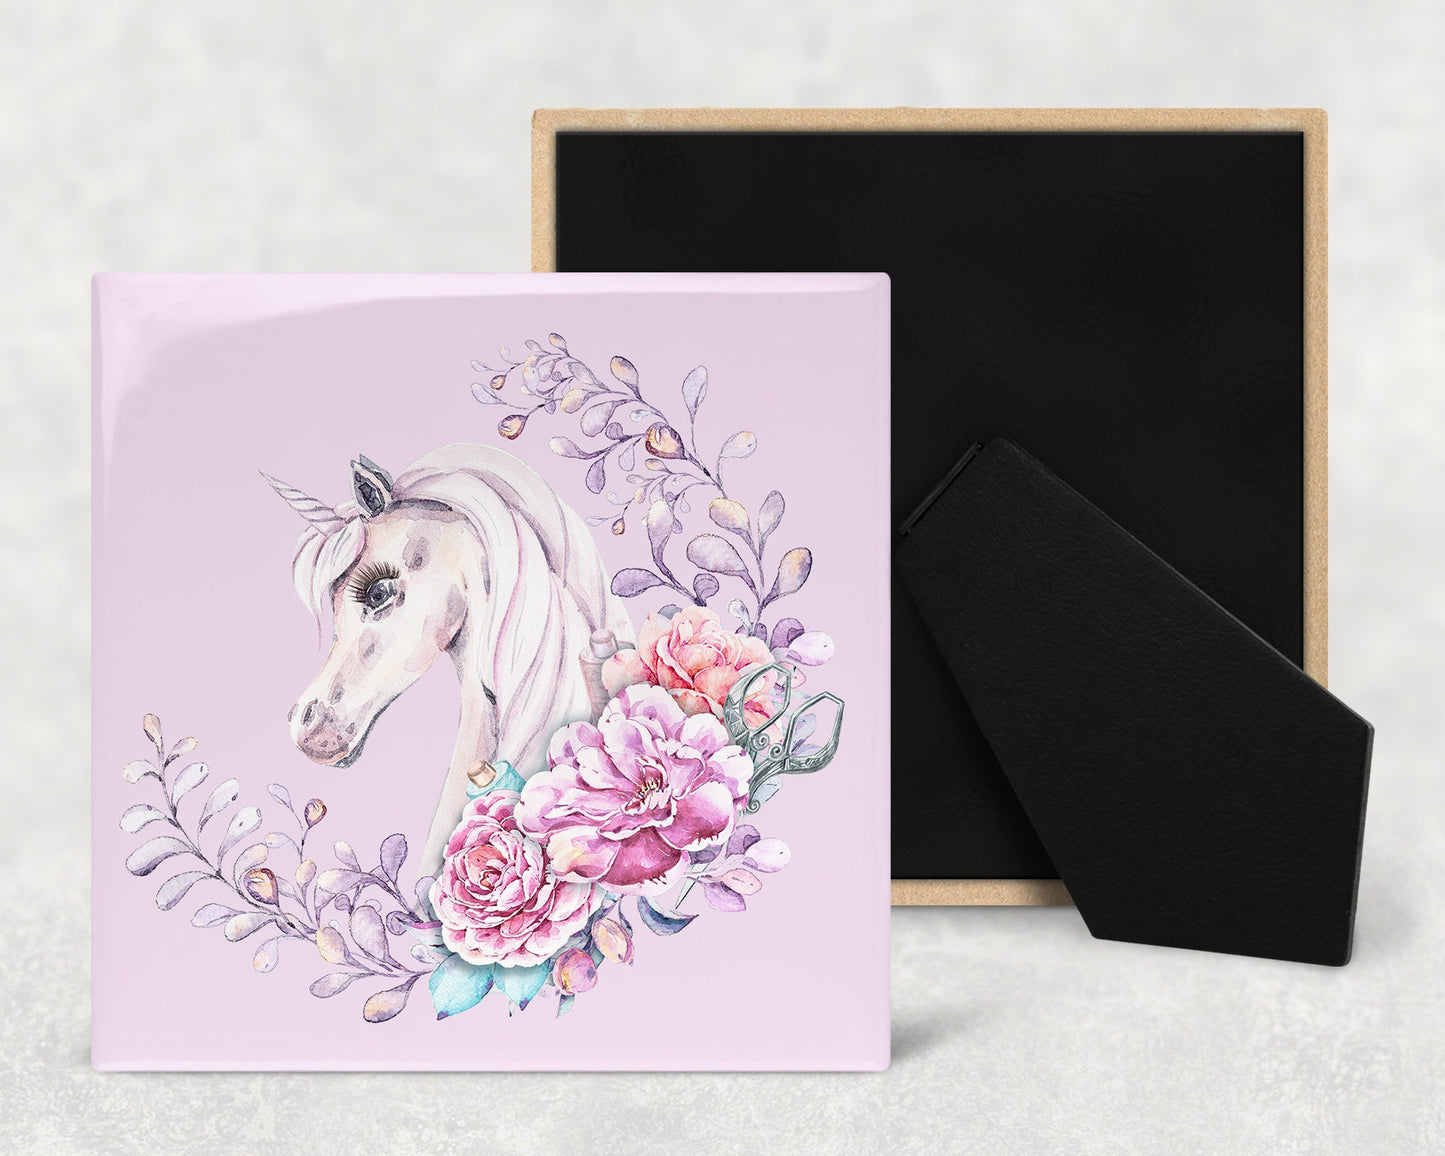 Unicorn Wreath Art Decorative Ceramic Tile with Optional Easel Back - Available in 3 Sizes